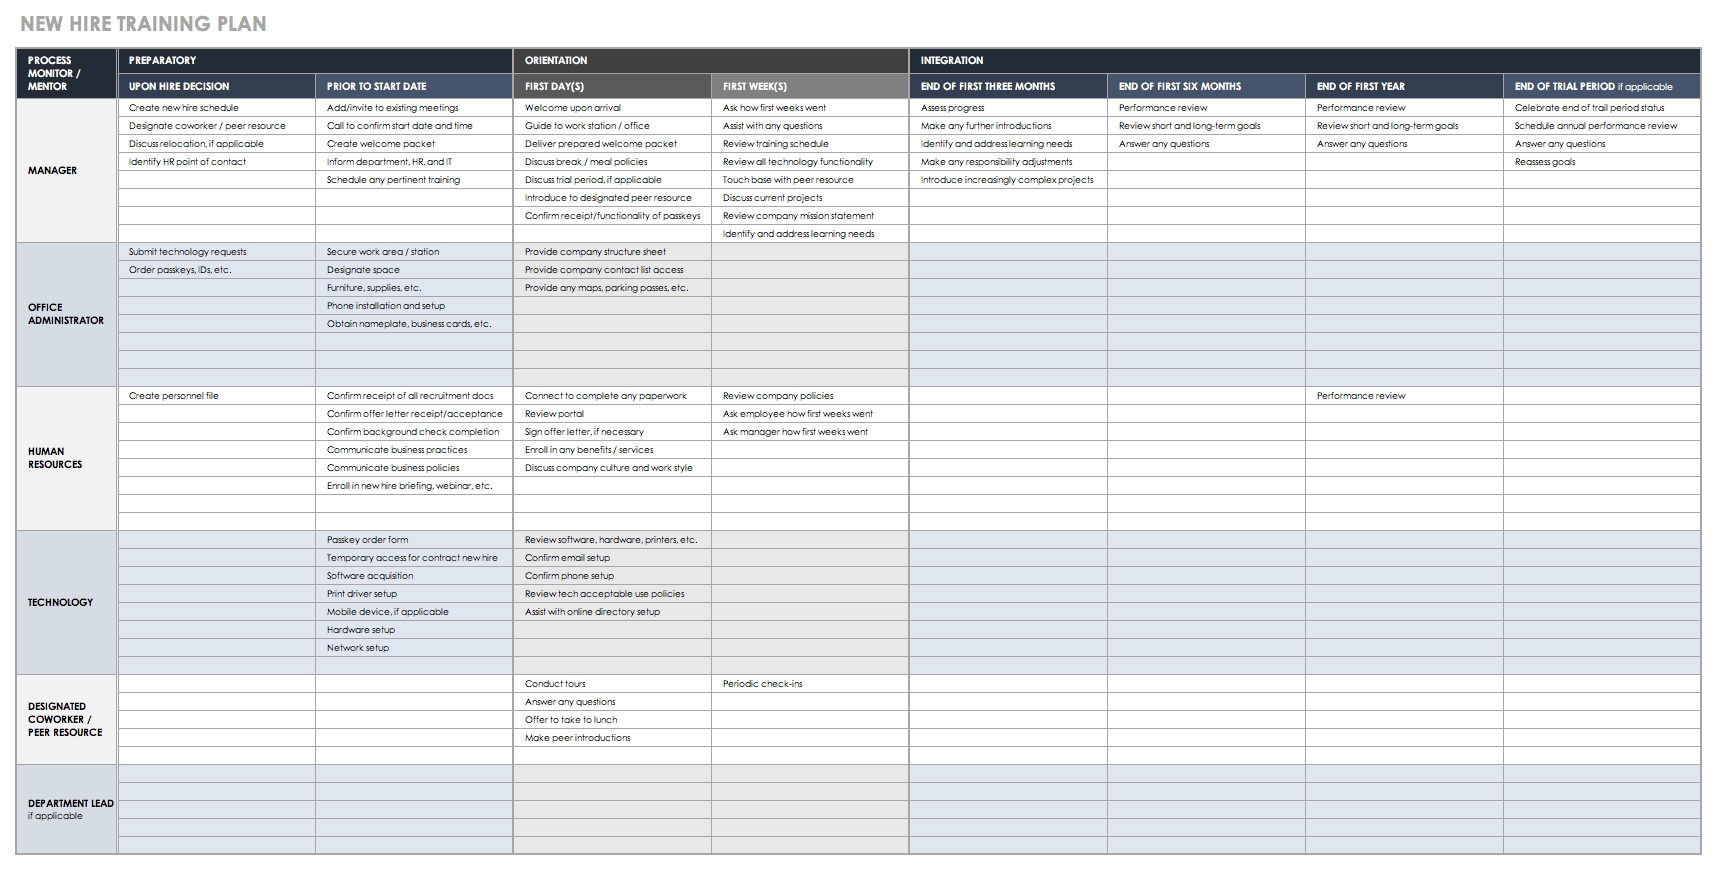 Free Training Plan Templates For Business Use | Smartsheet within 2 Week Induction Timetable Free Template